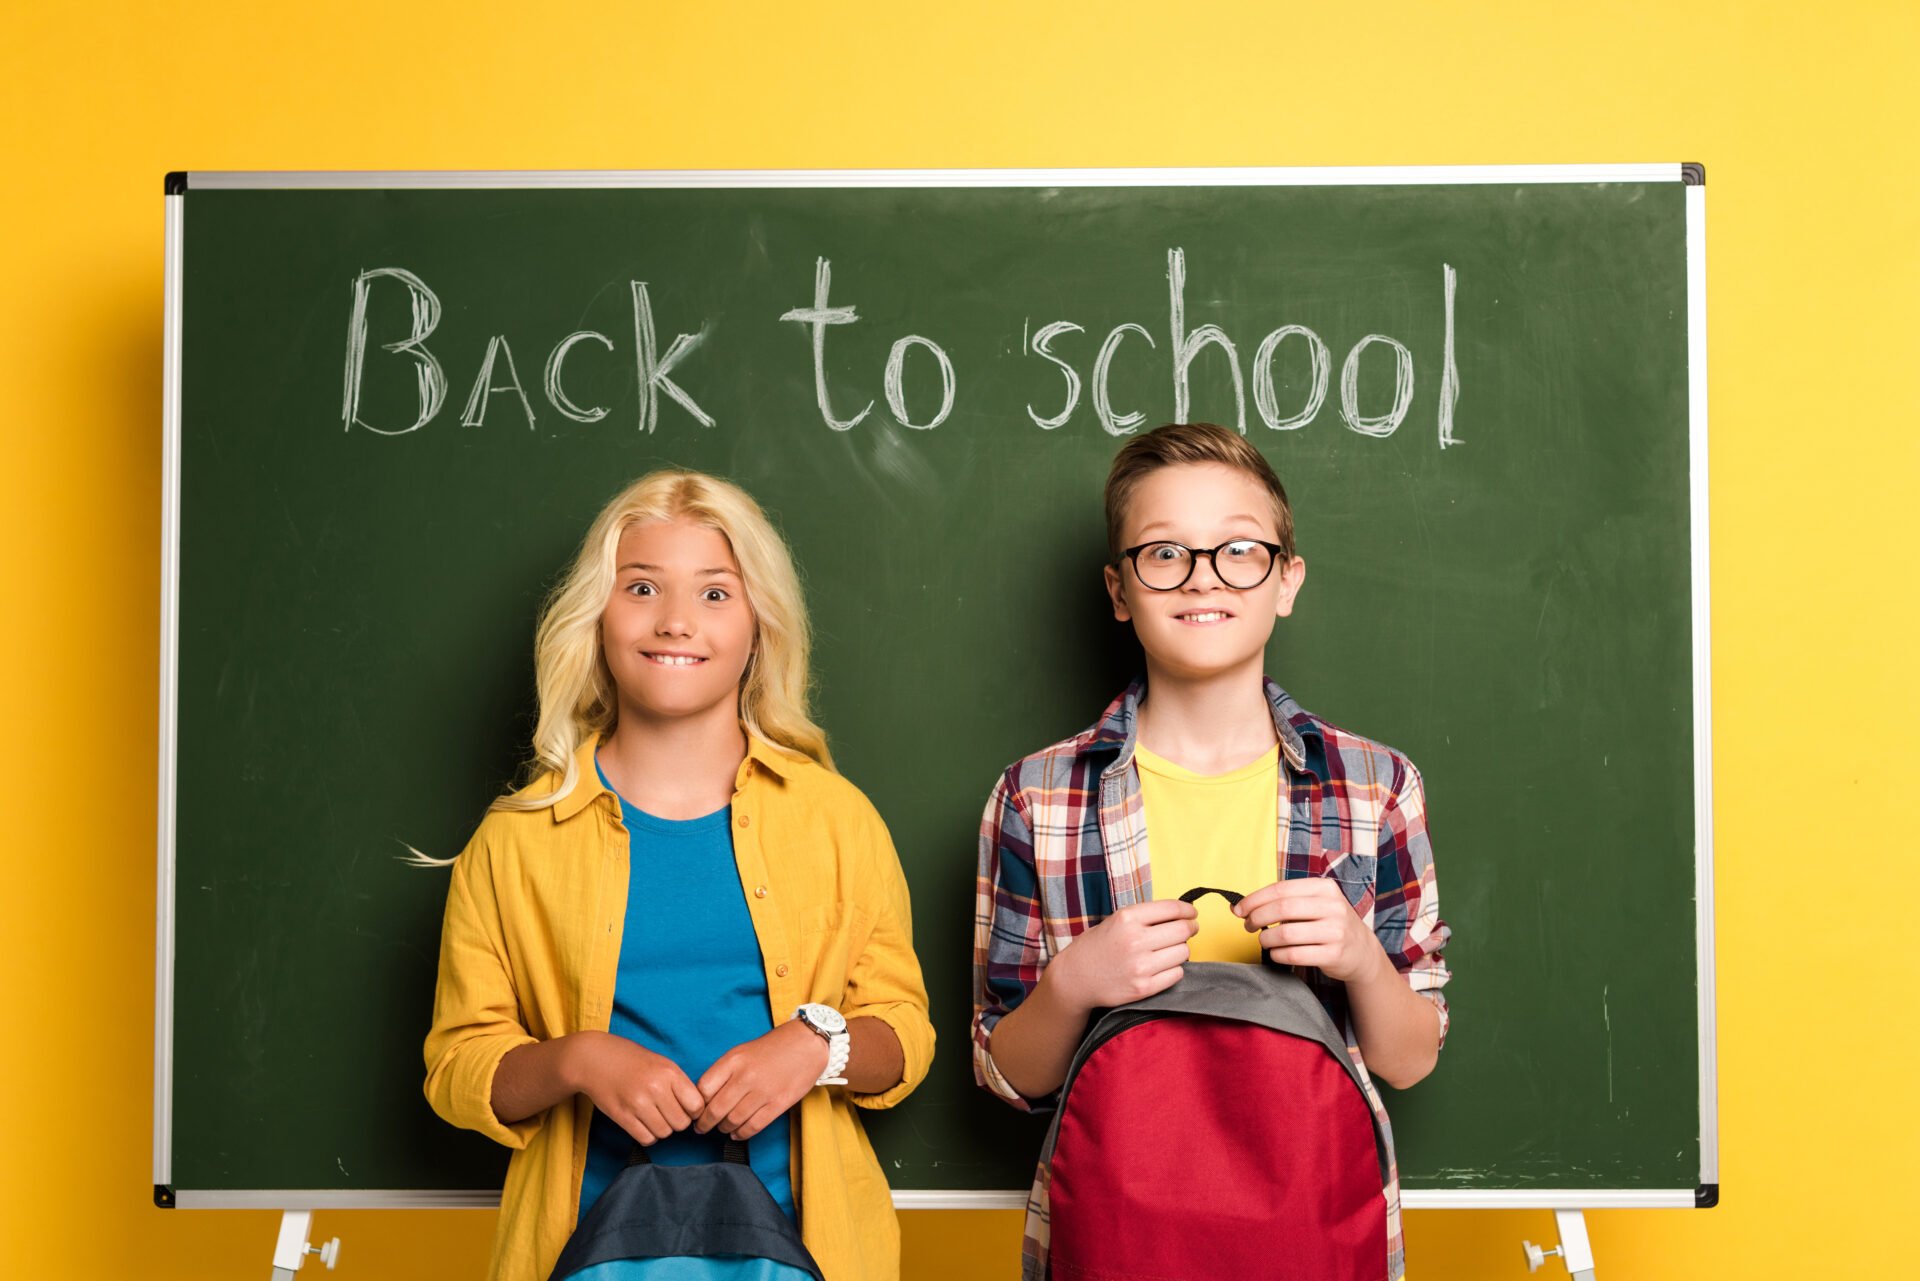 Back to school with children and their backpacks standing in front of a chalkboard